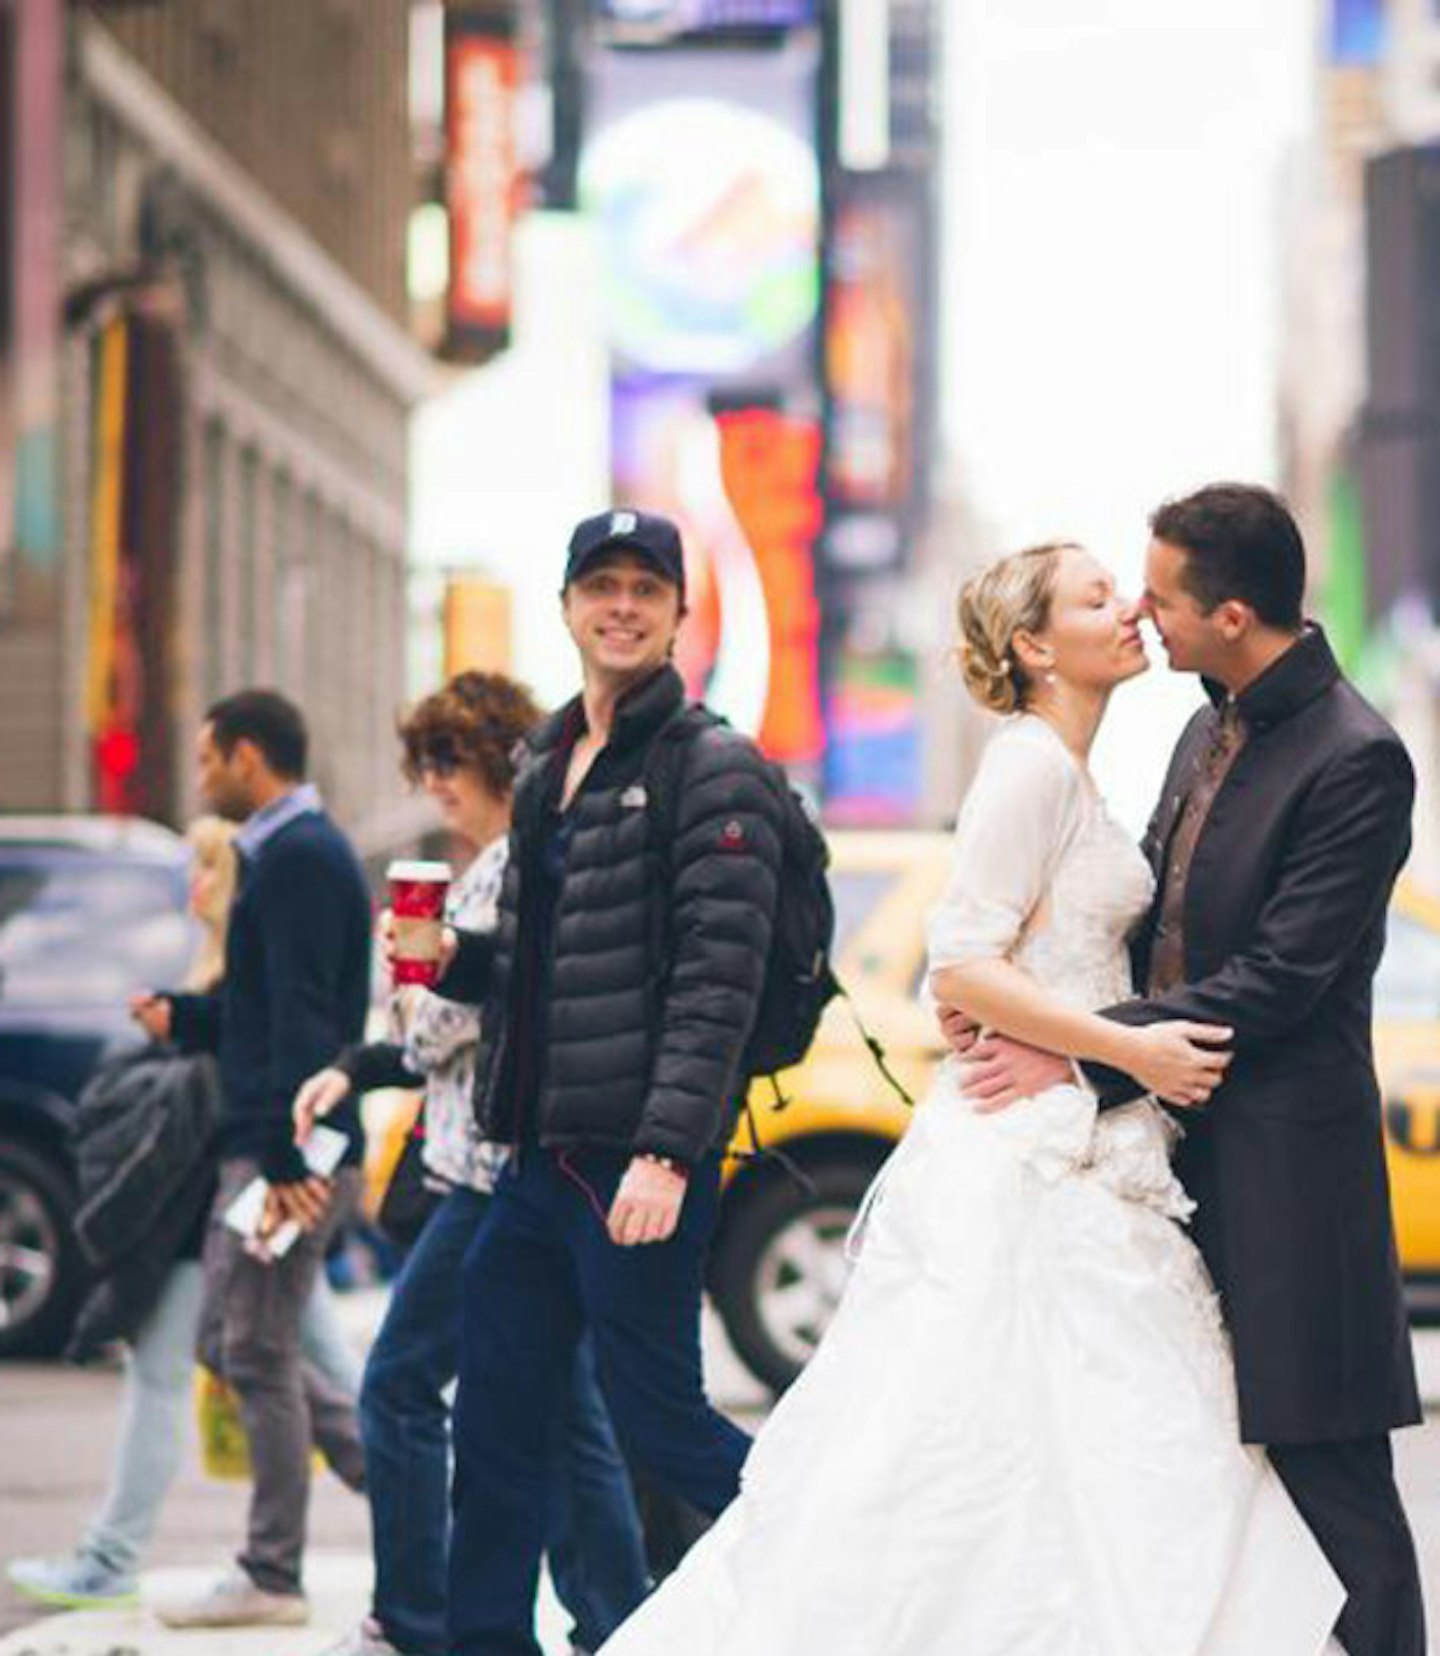 Zach Braff and a couple getting married